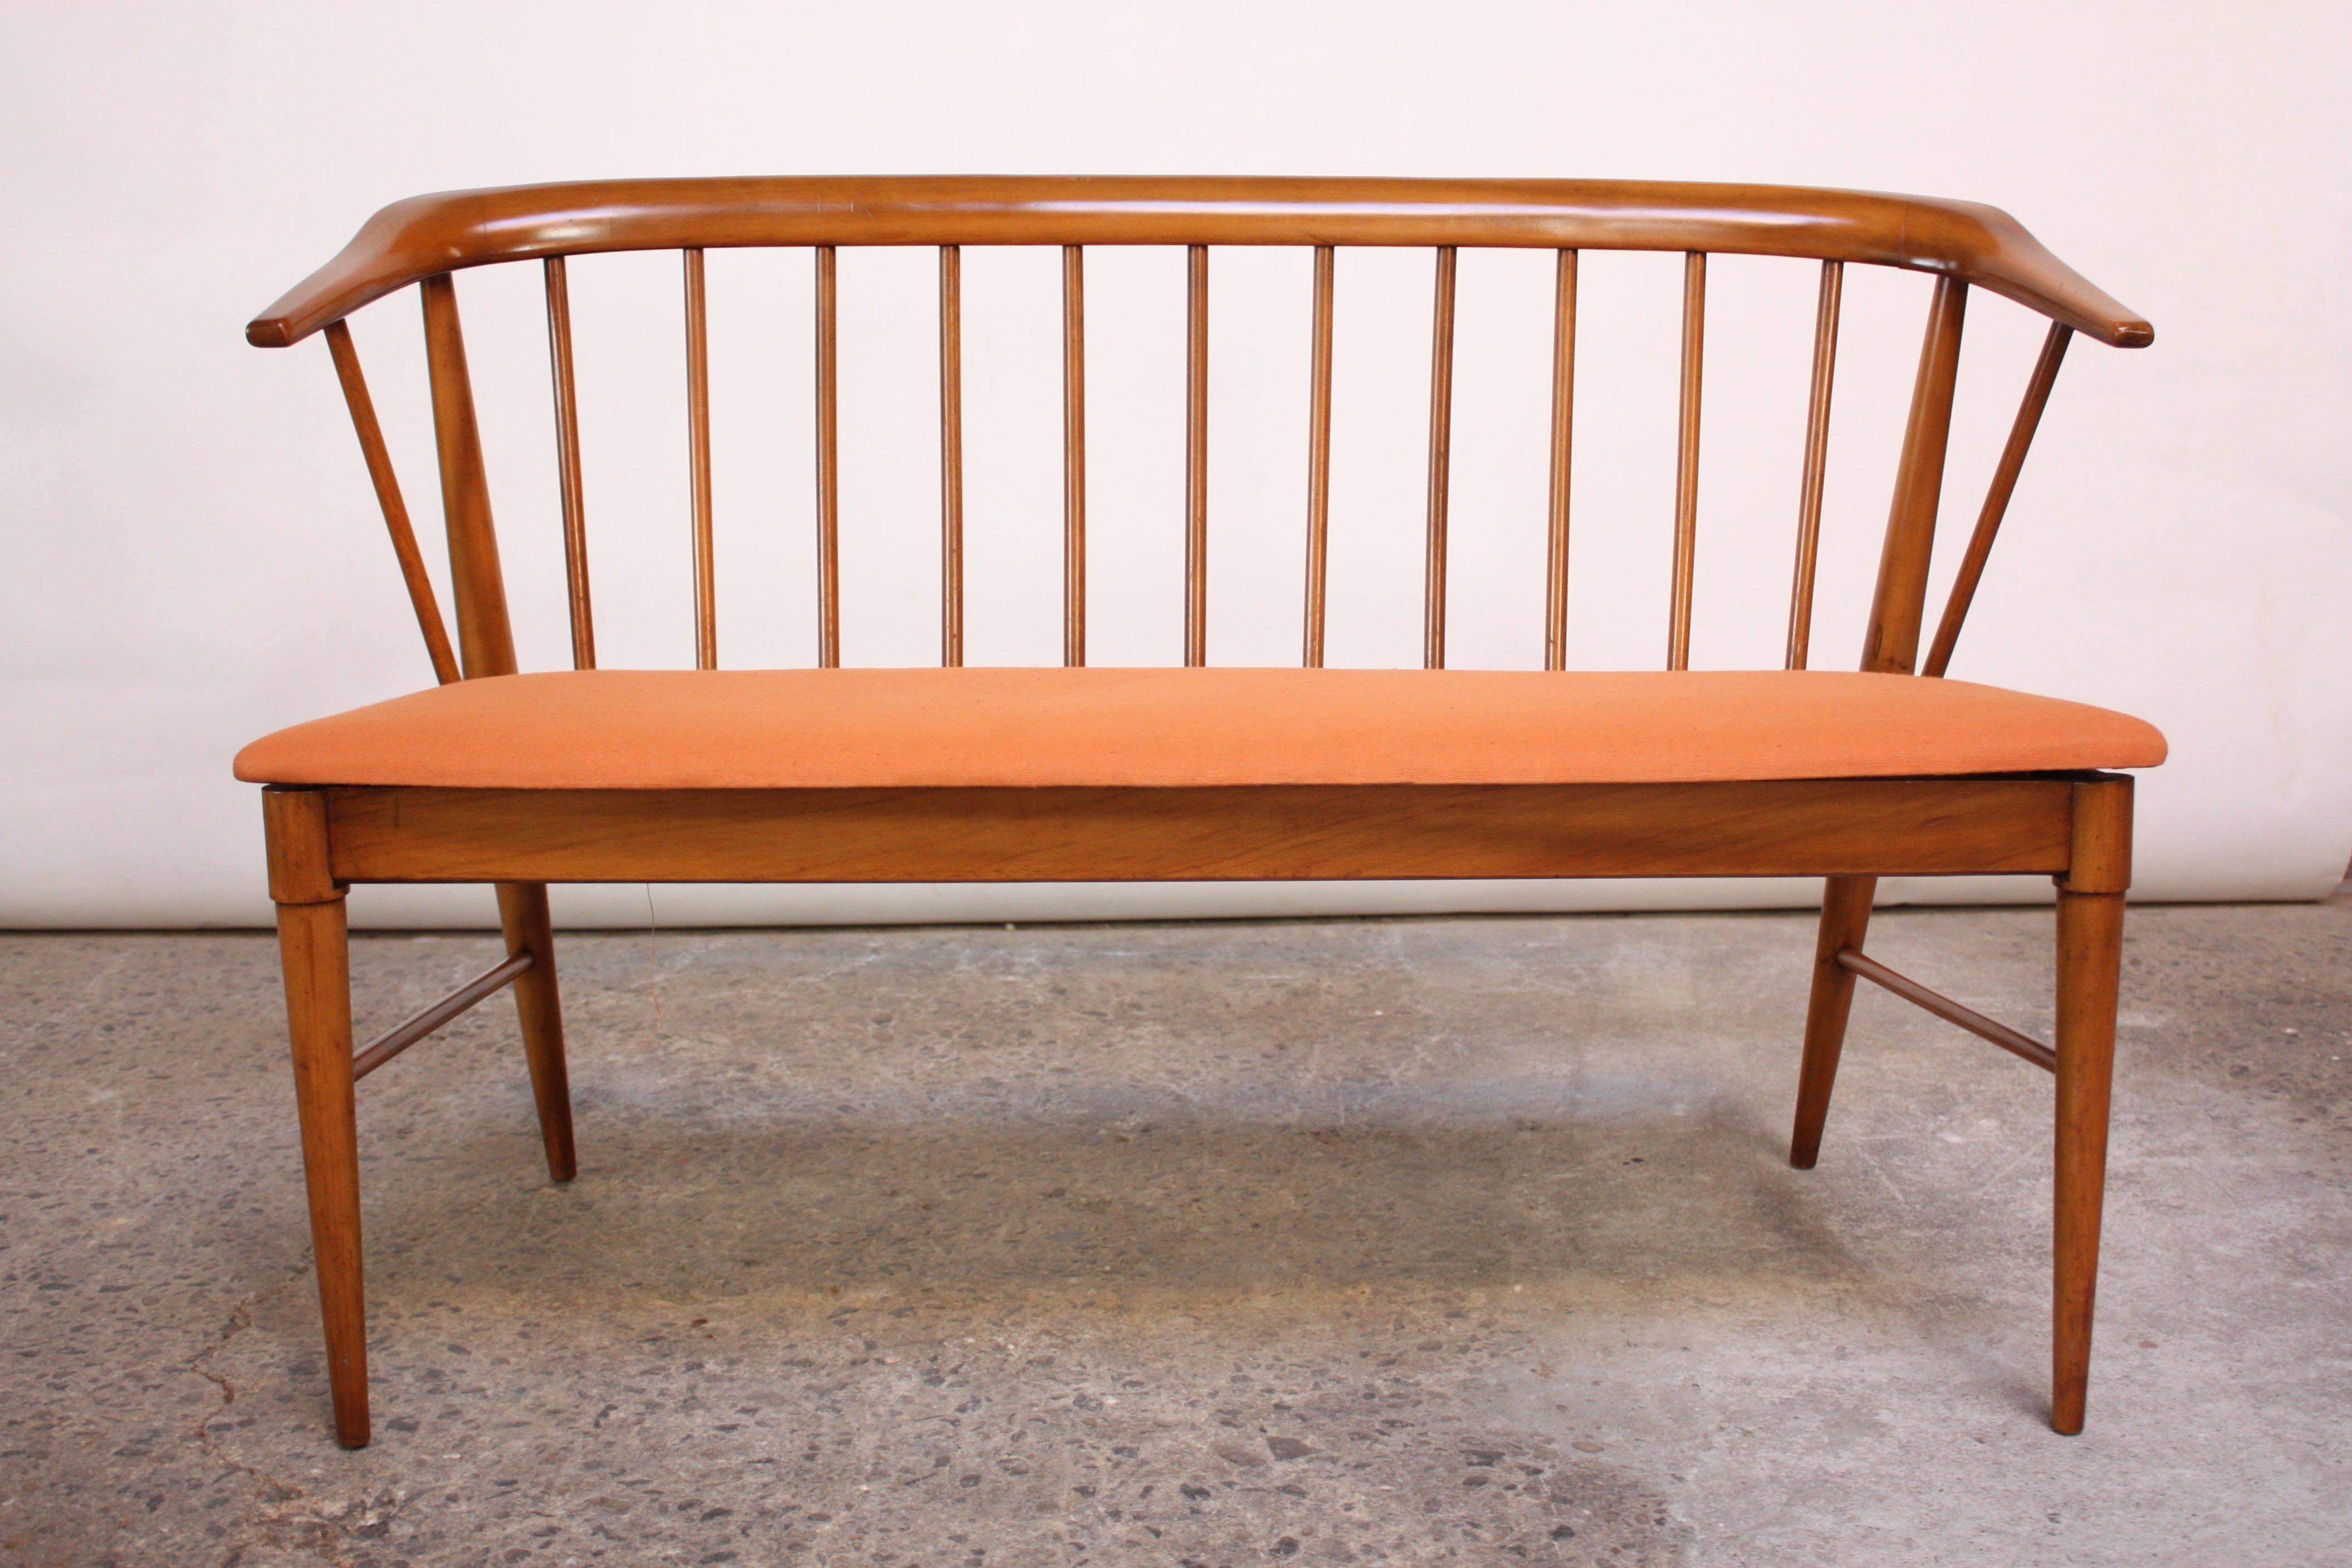 This Shaker-style American walnut bench features a spindle-back construction with a curved back arm or backrest.
The vintage linen upholstery was salvaged, as the previous owner covered over this original fabric. The fabric is in excellent, vintage